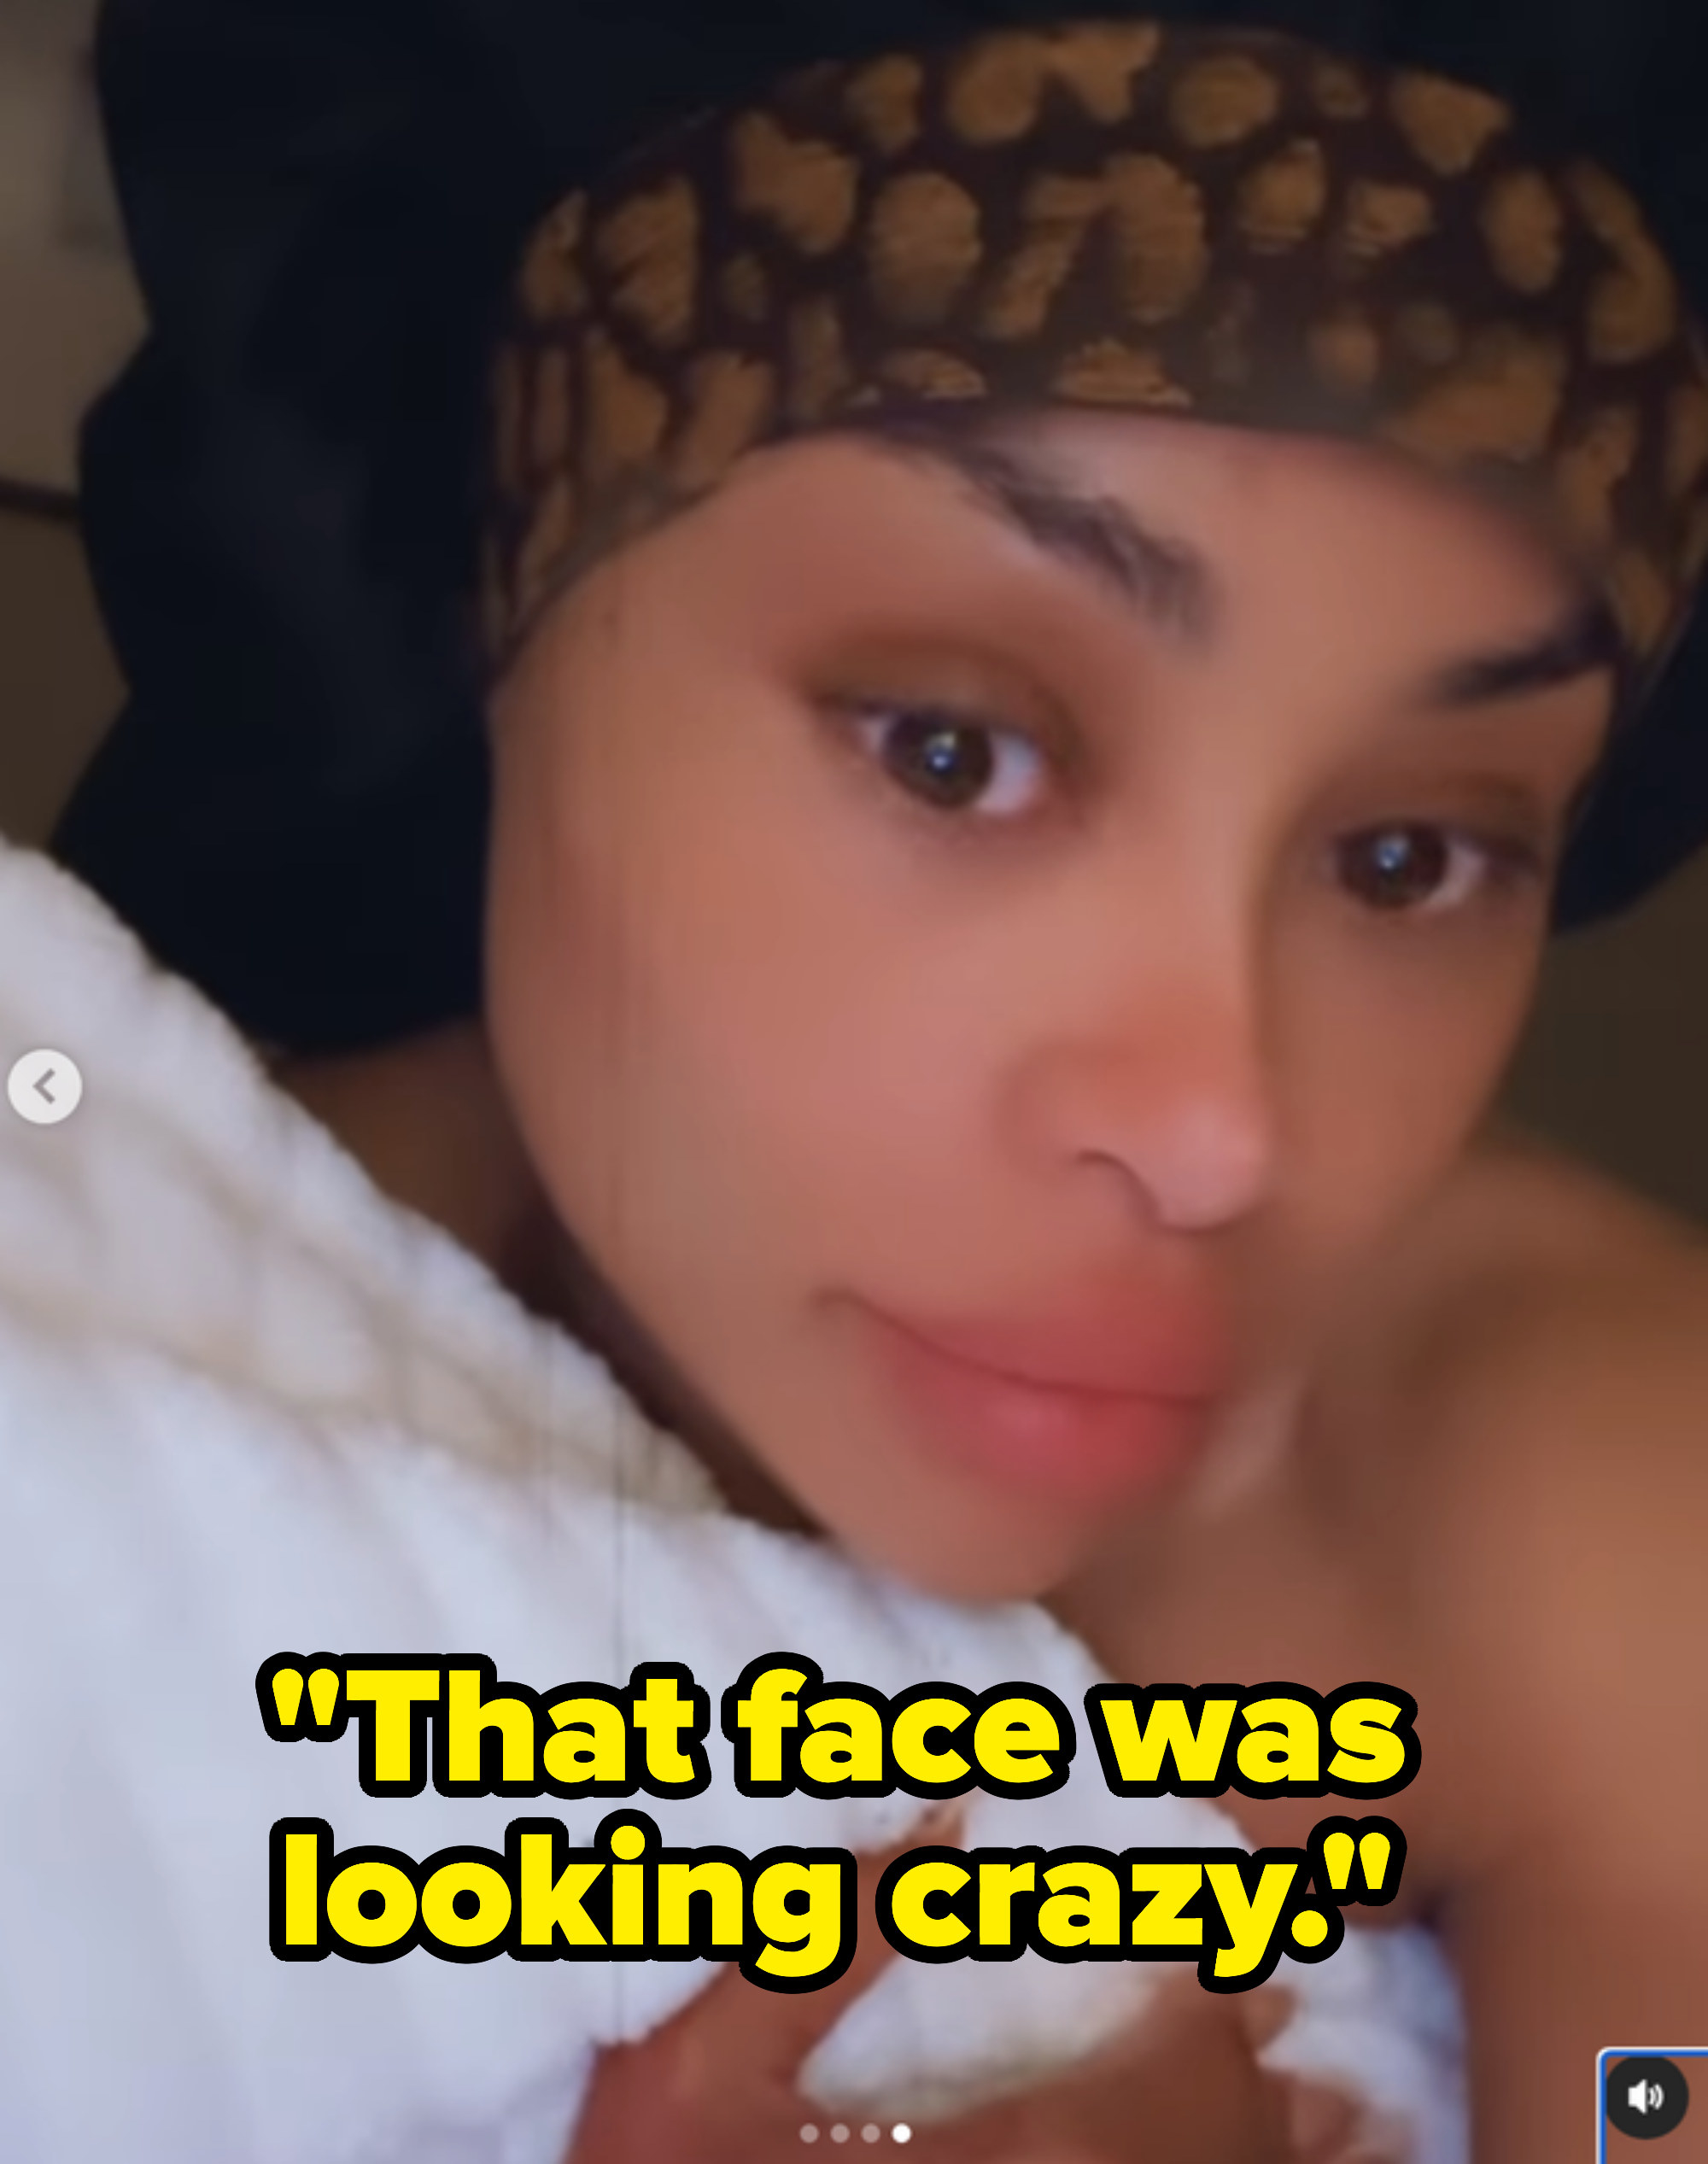 her in the video saying that face was looking crazy